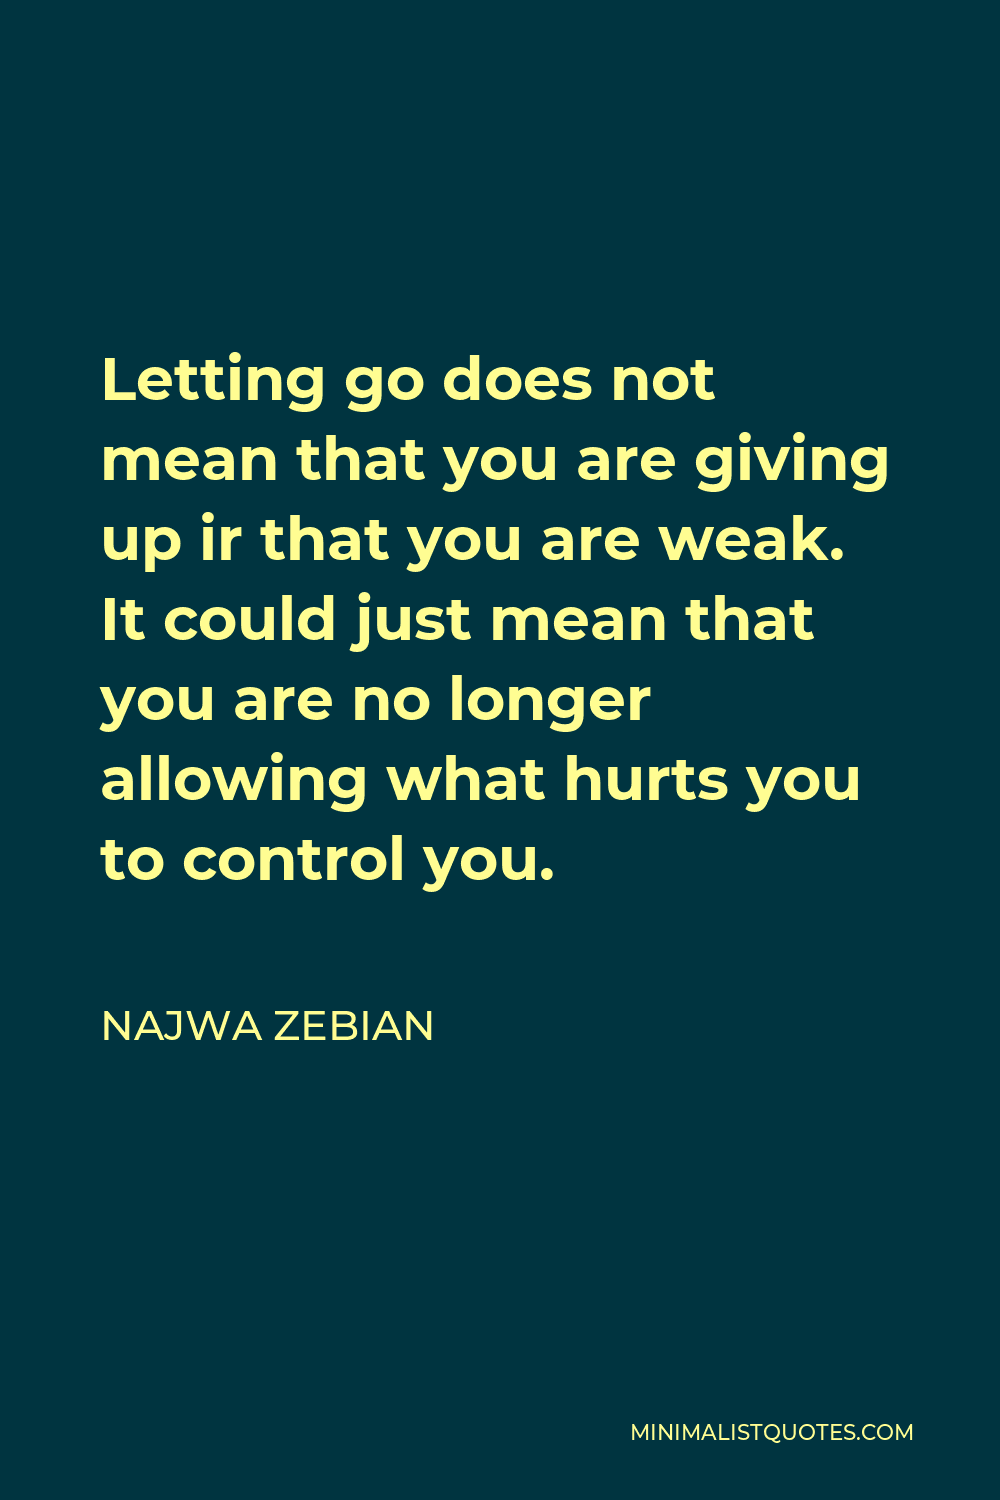 Najwa Zebian Quote - Letting go does not mean that you are giving up ir that you are weak. It could just mean that you are no longer allowing what hurts you to control you.